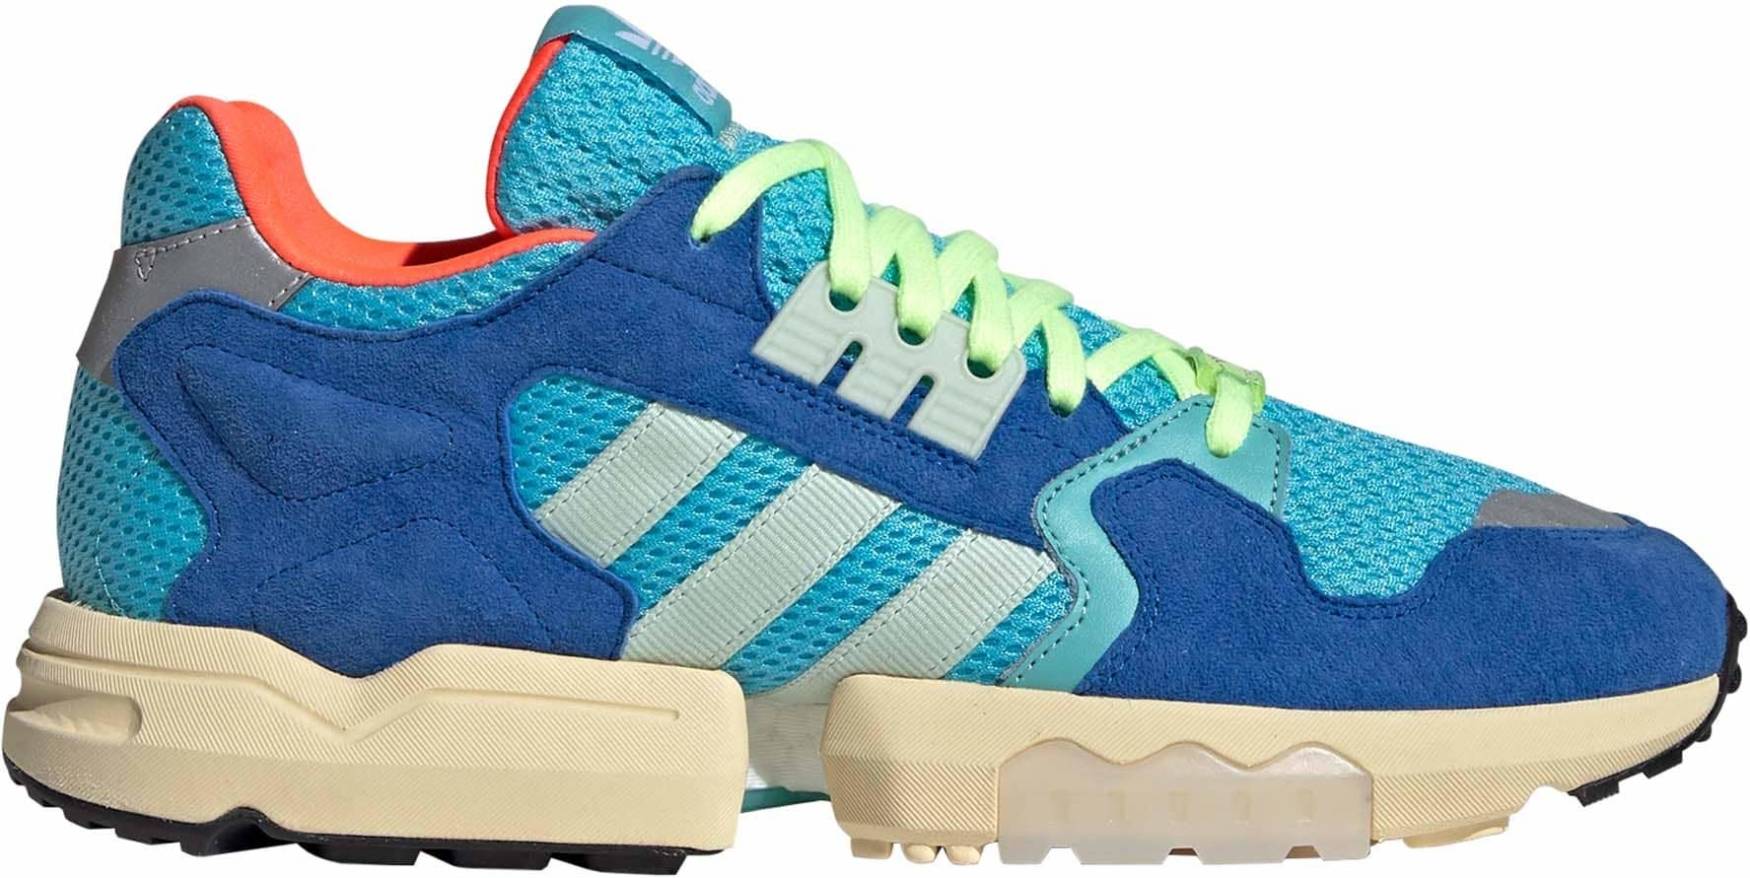 Adidas ZX Torsion sneakers in 9 colors (only $60) | RunRepeat شامبو لوريال